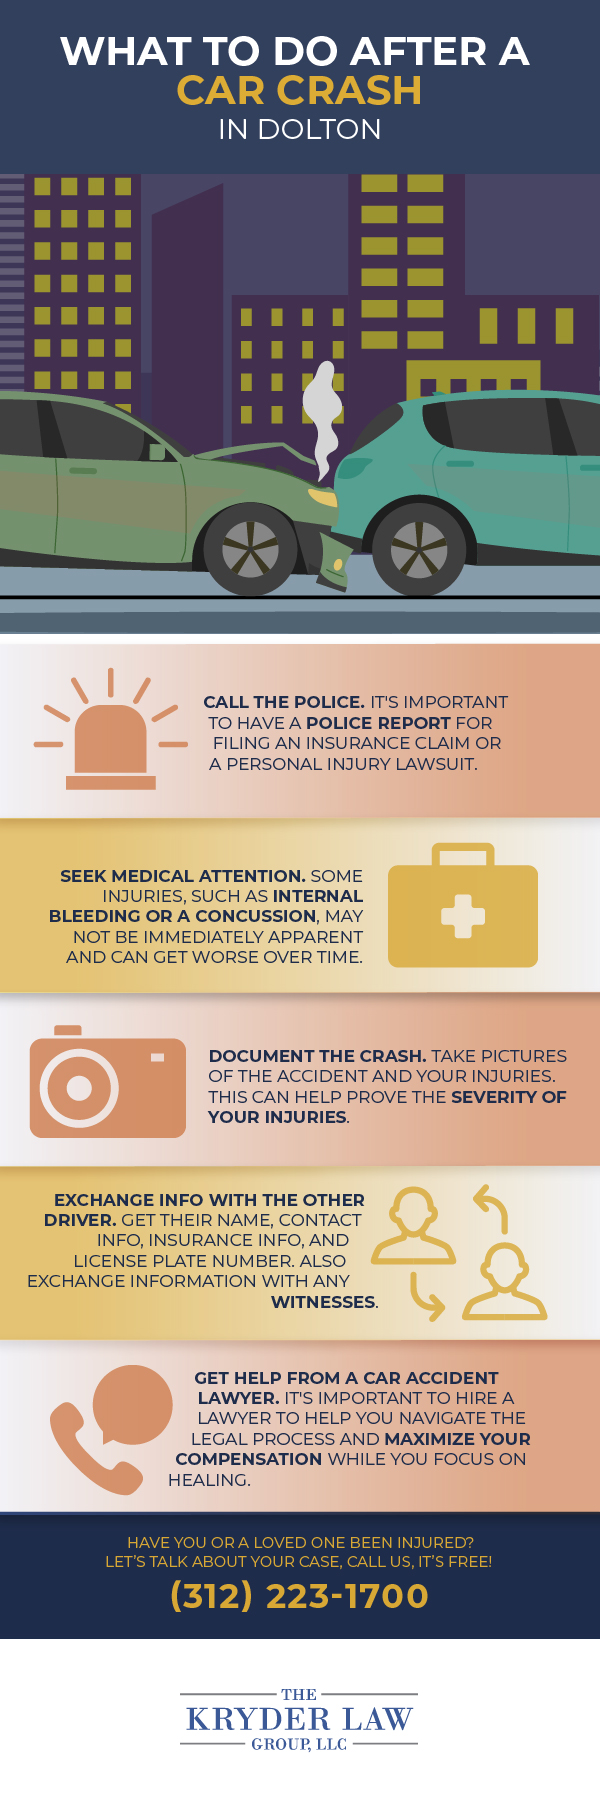 What to Do After a Car Crash in Dolton Infographic